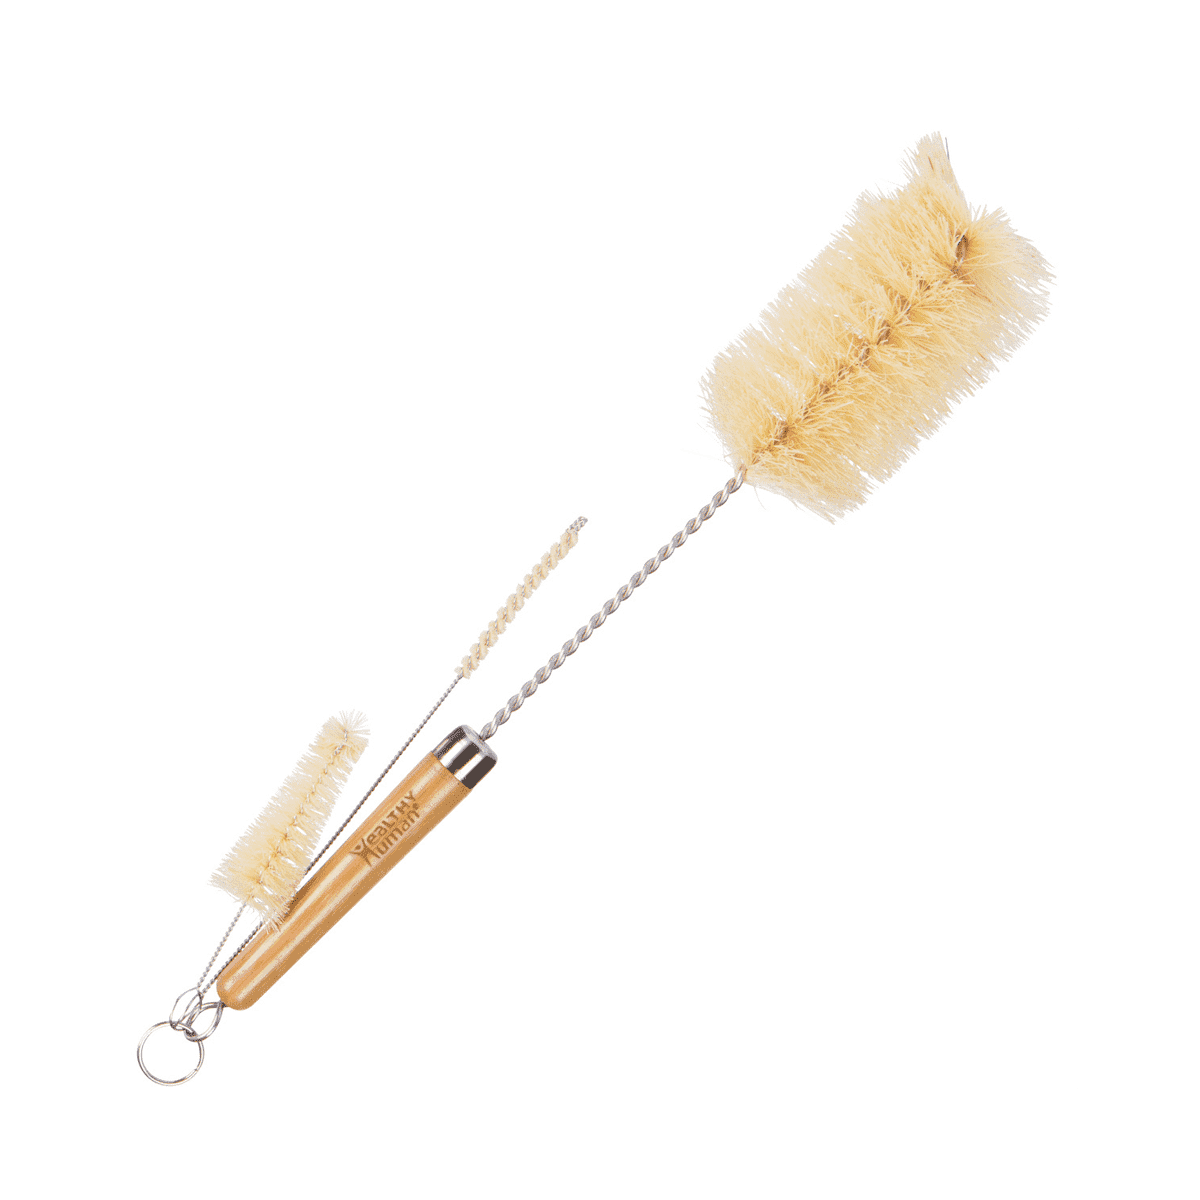 brush-bamboo-white-bg_57030c2c-e783-4e10-a3ec-b3f4be7a6ebb_2048x2048.png